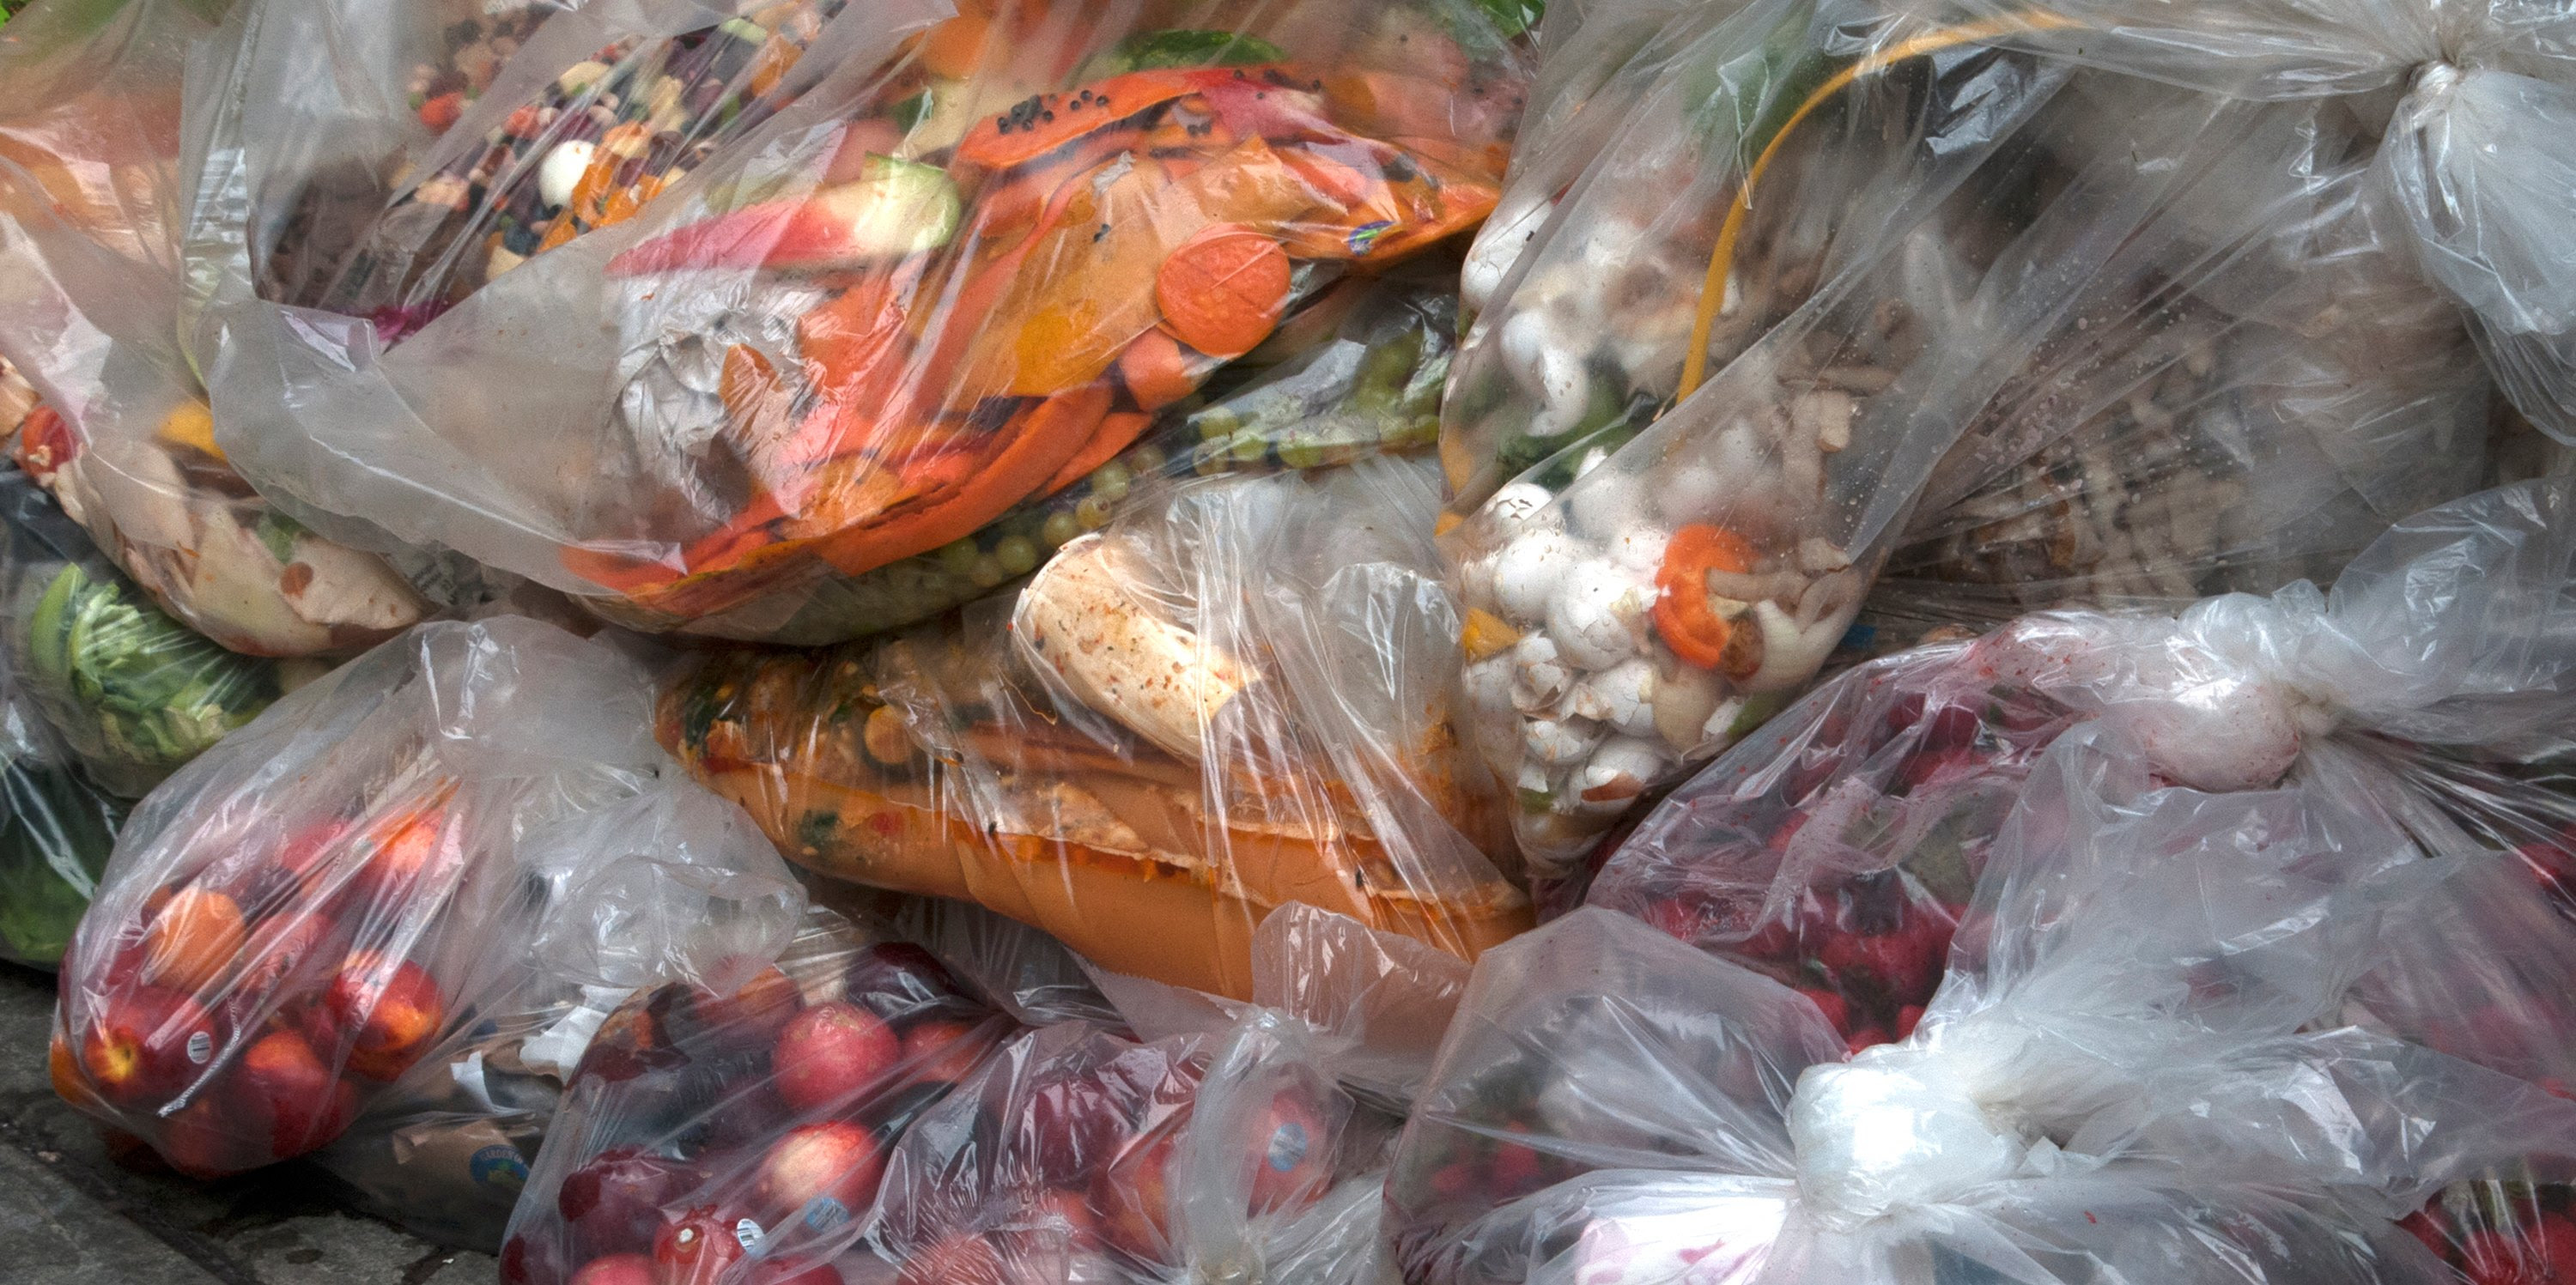 Bags of perfectly good produce discarded in the trash